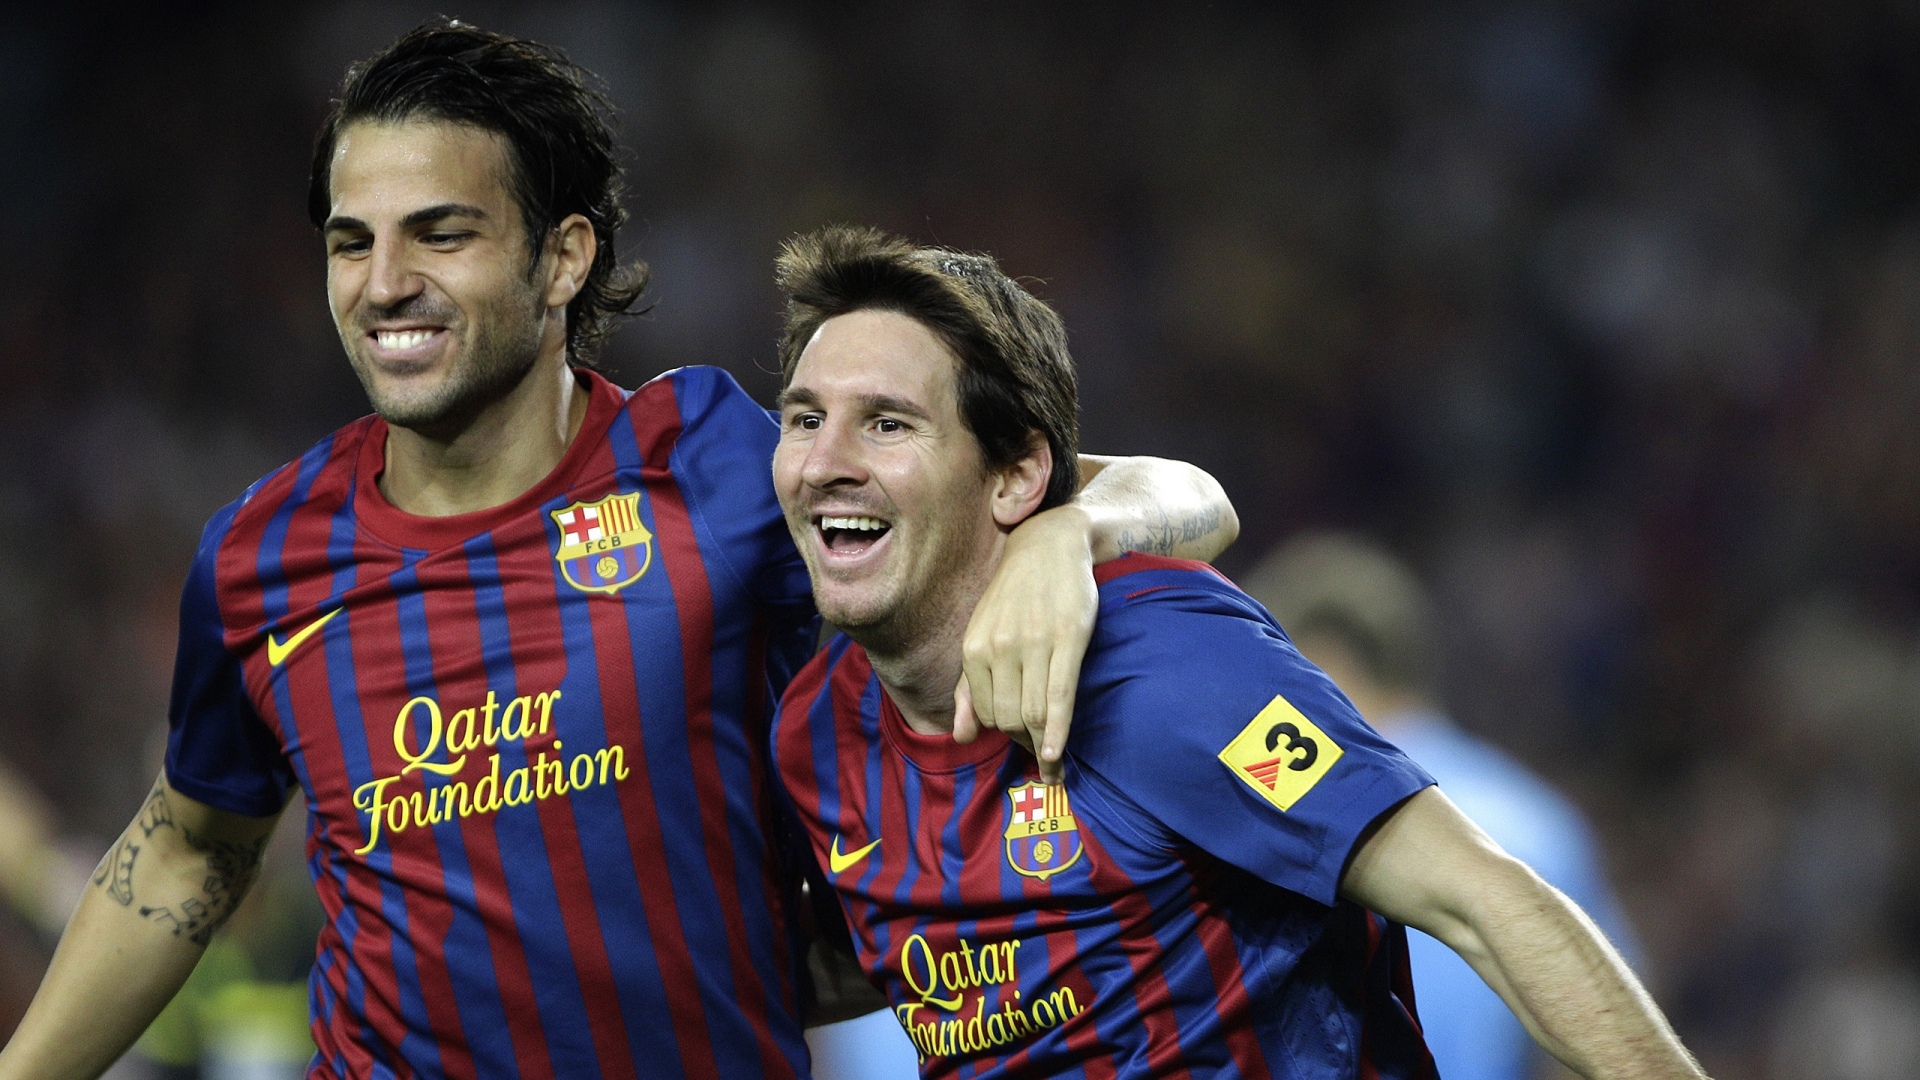 Cesc Fabregas and Lionel Messi for 1920 x 1080 HDTV 1080p resolution